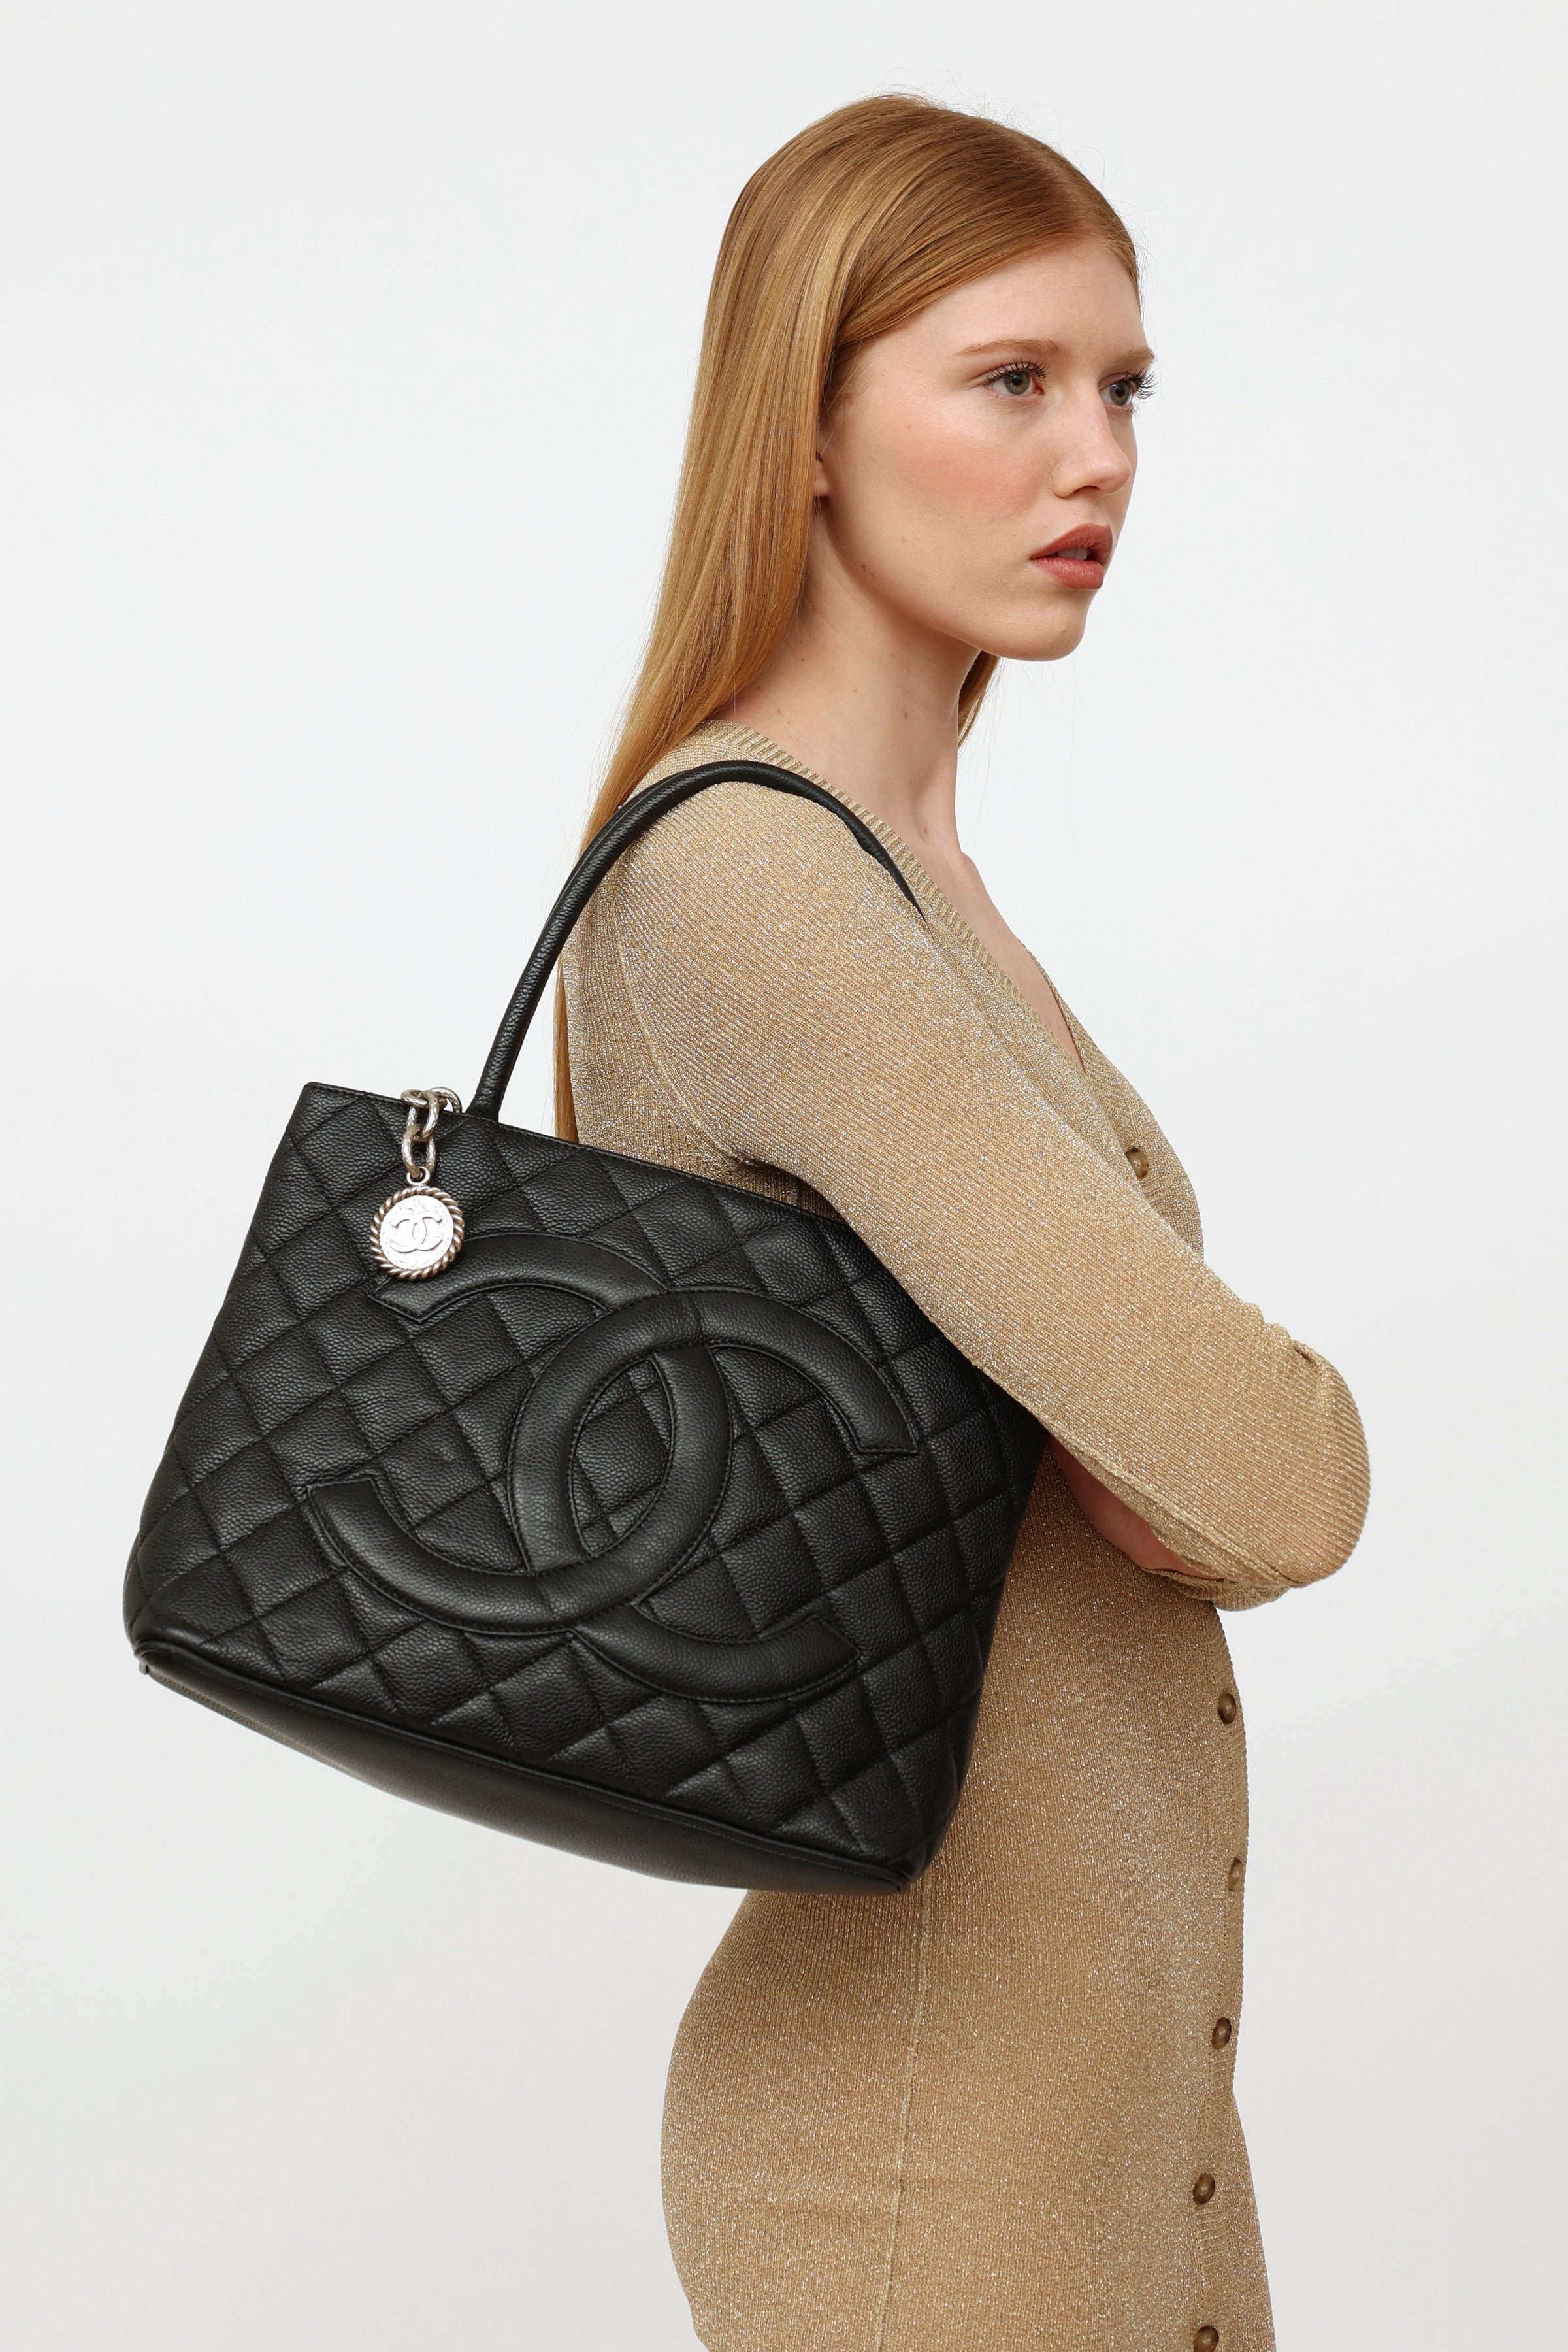 Chanel Quilted Caviar Leather Medallion Tote Bag